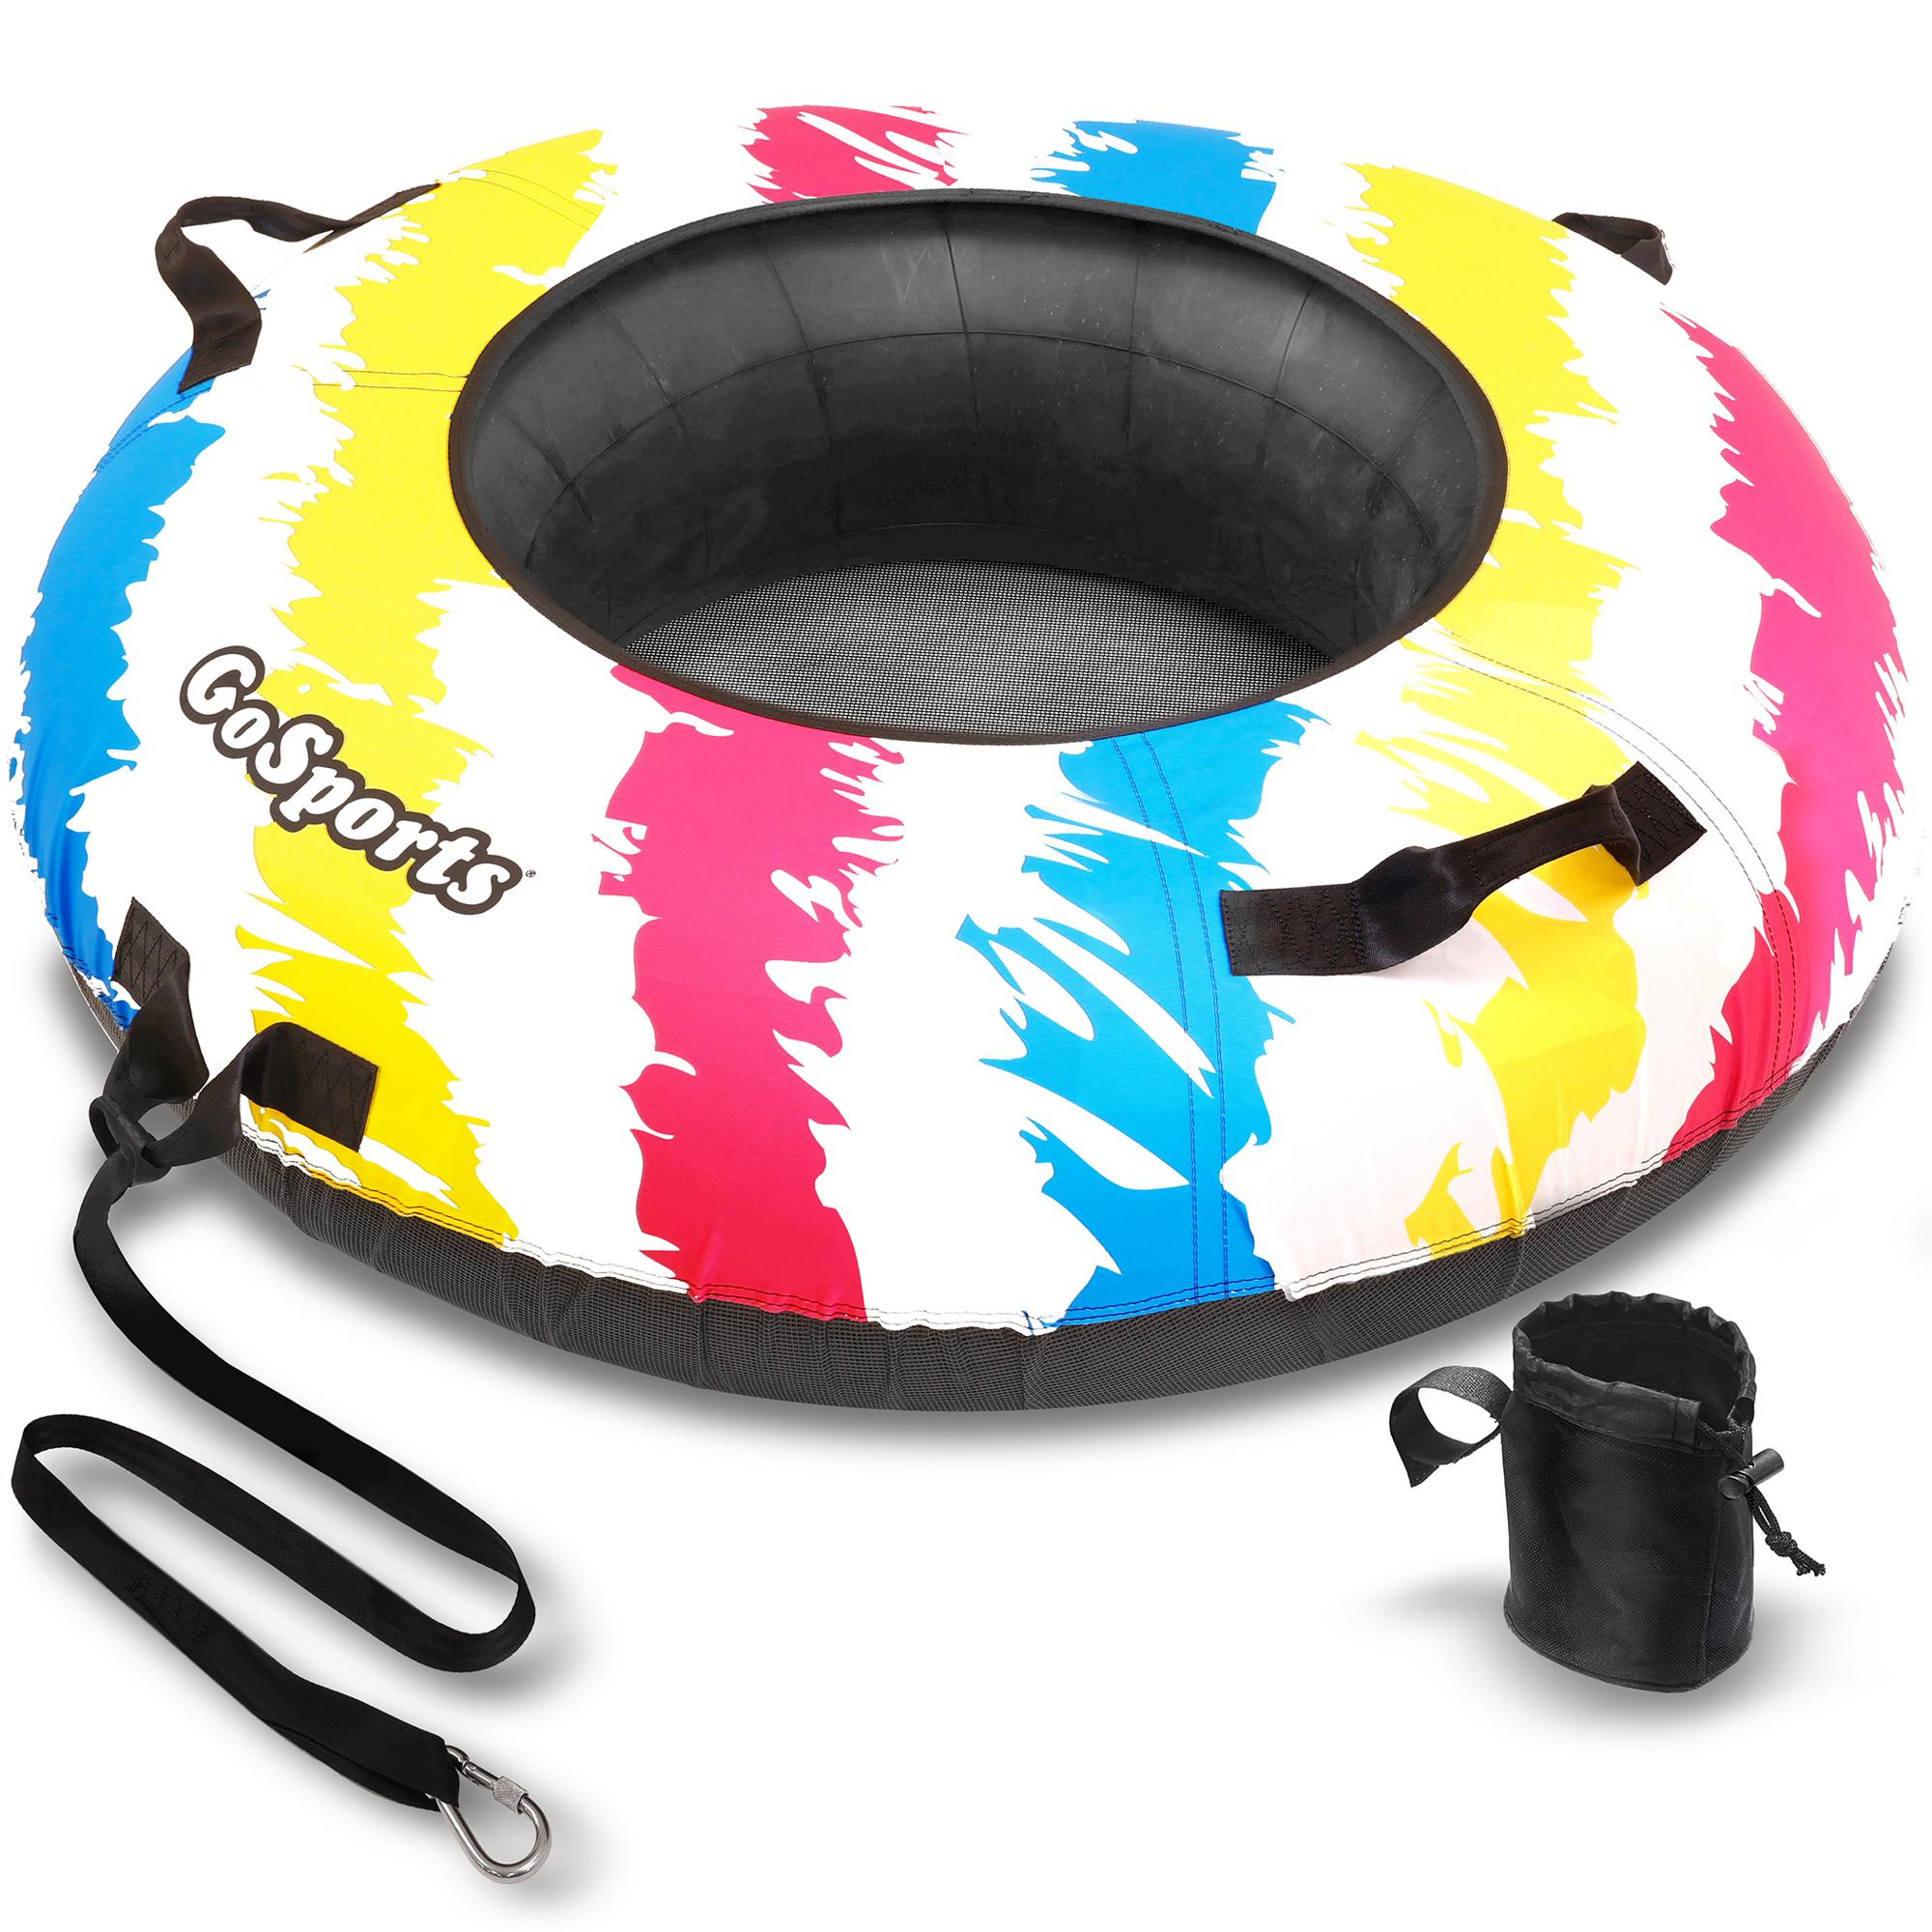 I'm looking to buy a compact float tube that can fit into a 70